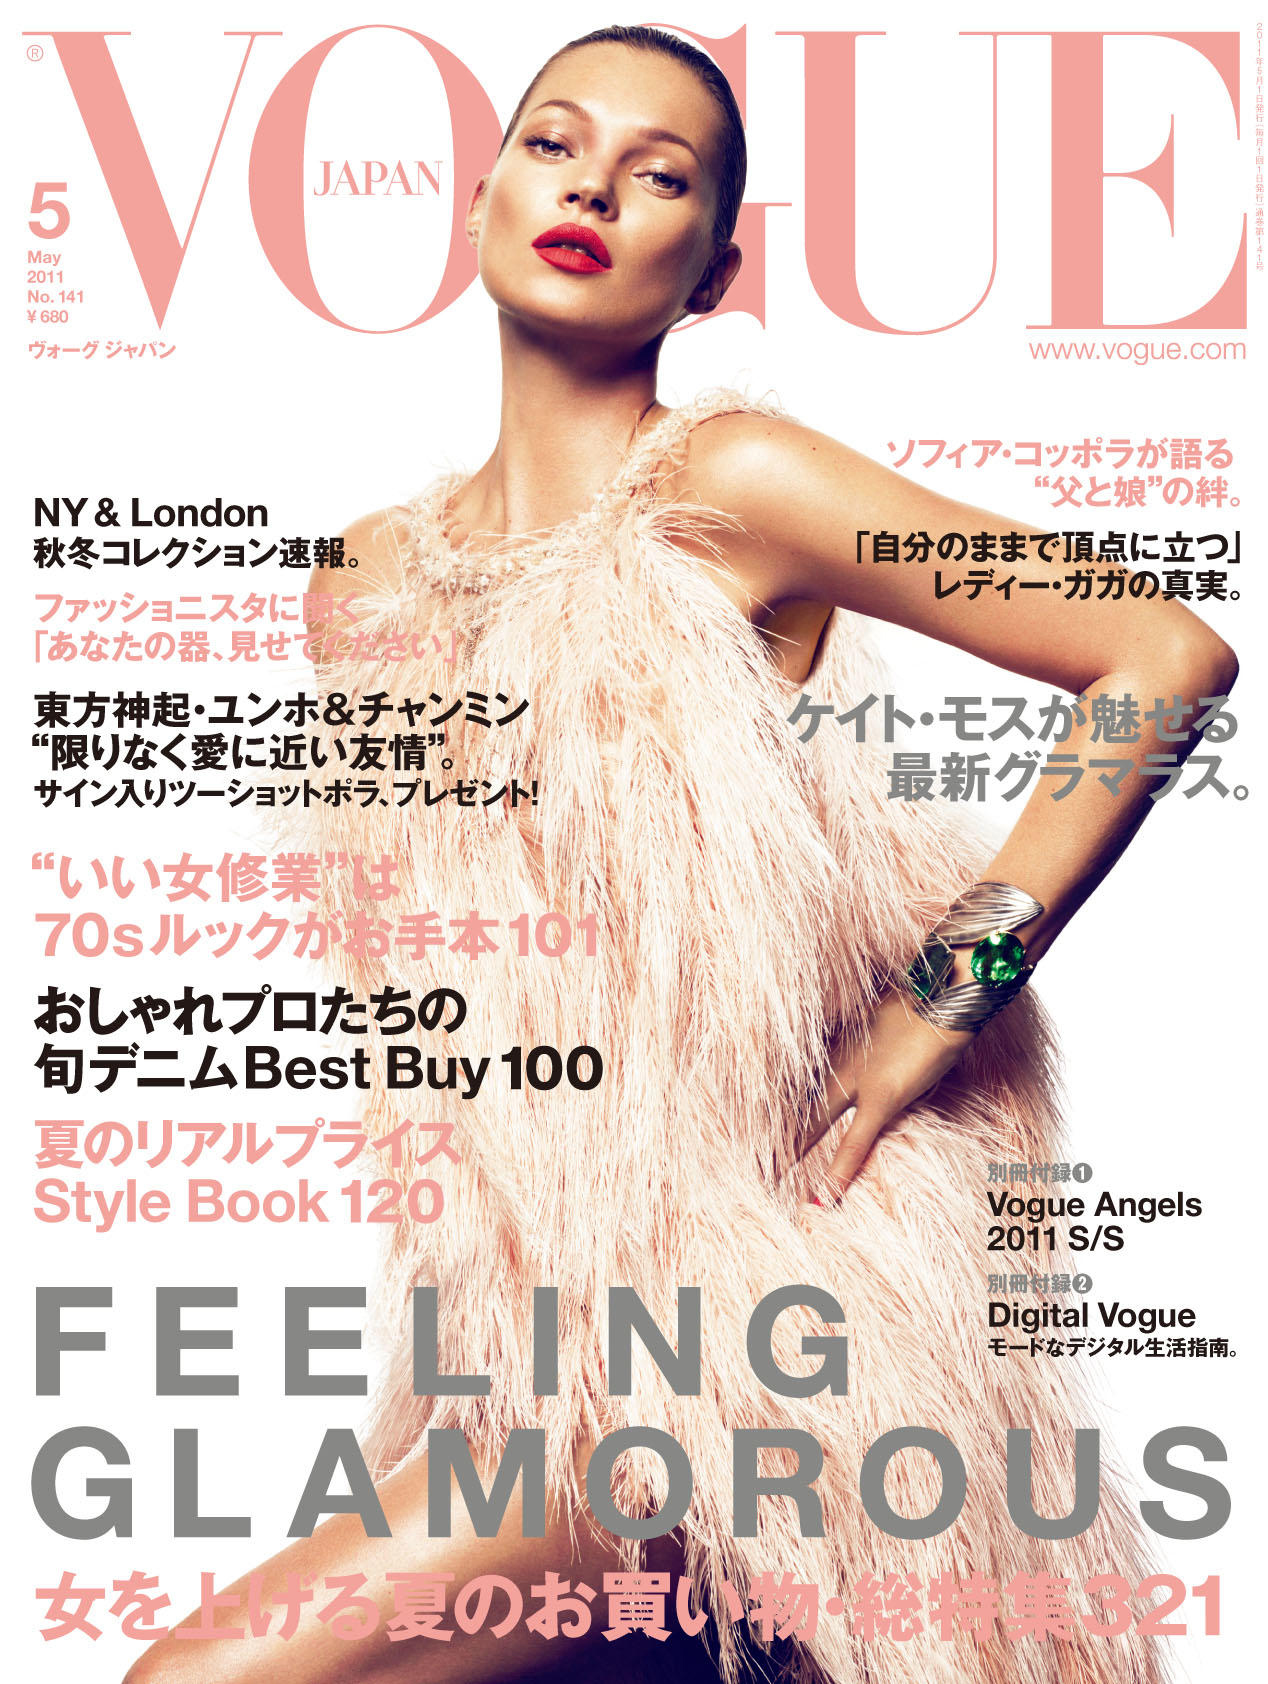 Vogue Japan May 2011 Cover Story Editorial